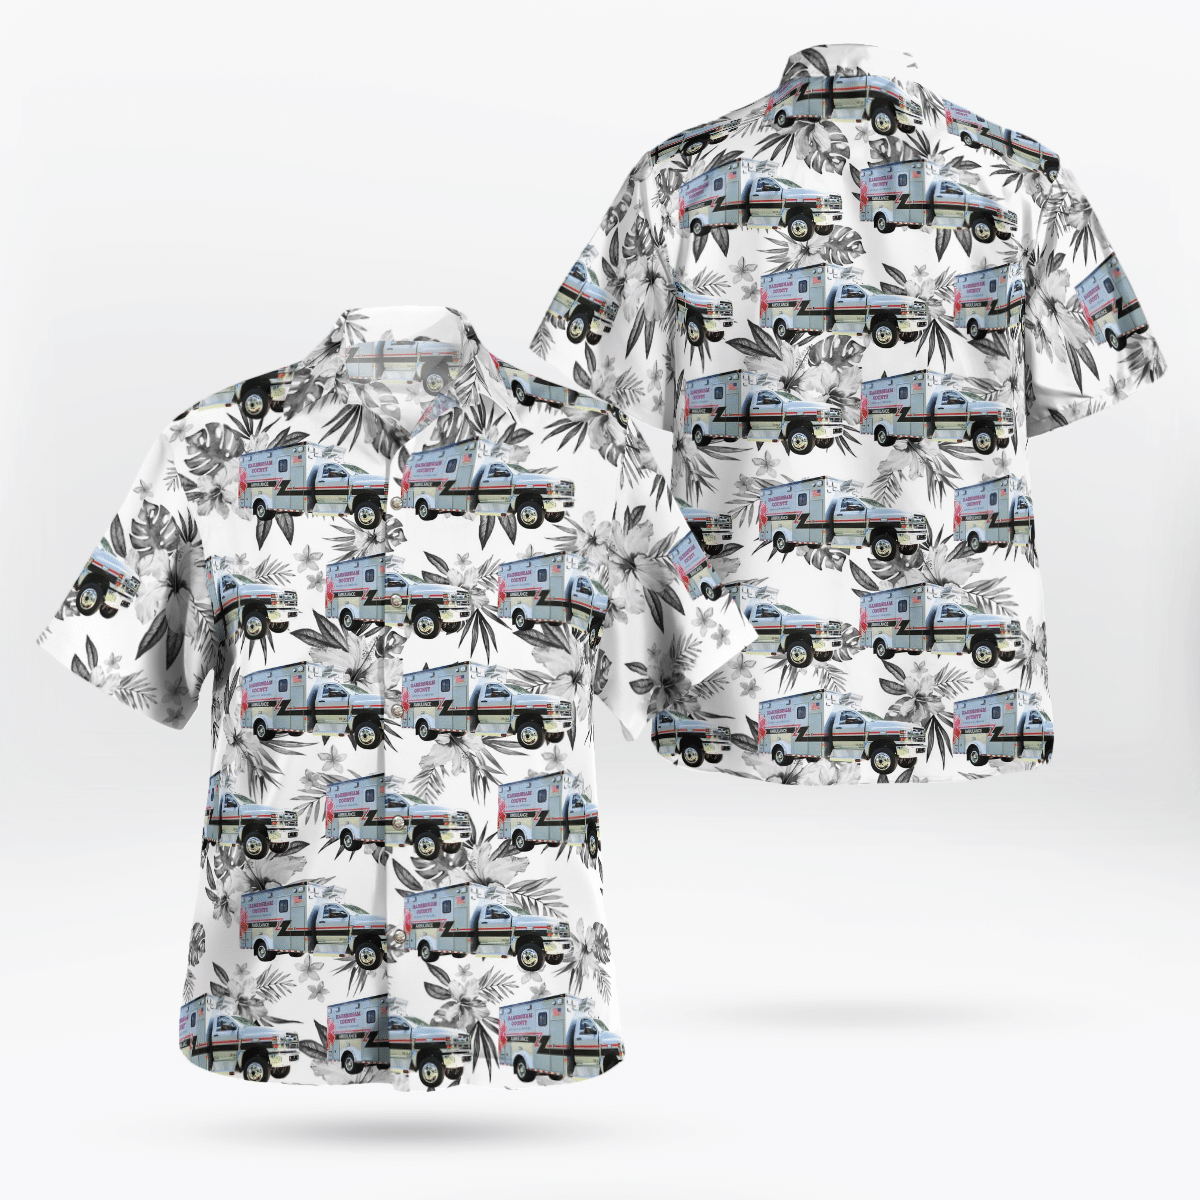 If you are in need of a new summertime look, pick up this Hawaiian shirt 29